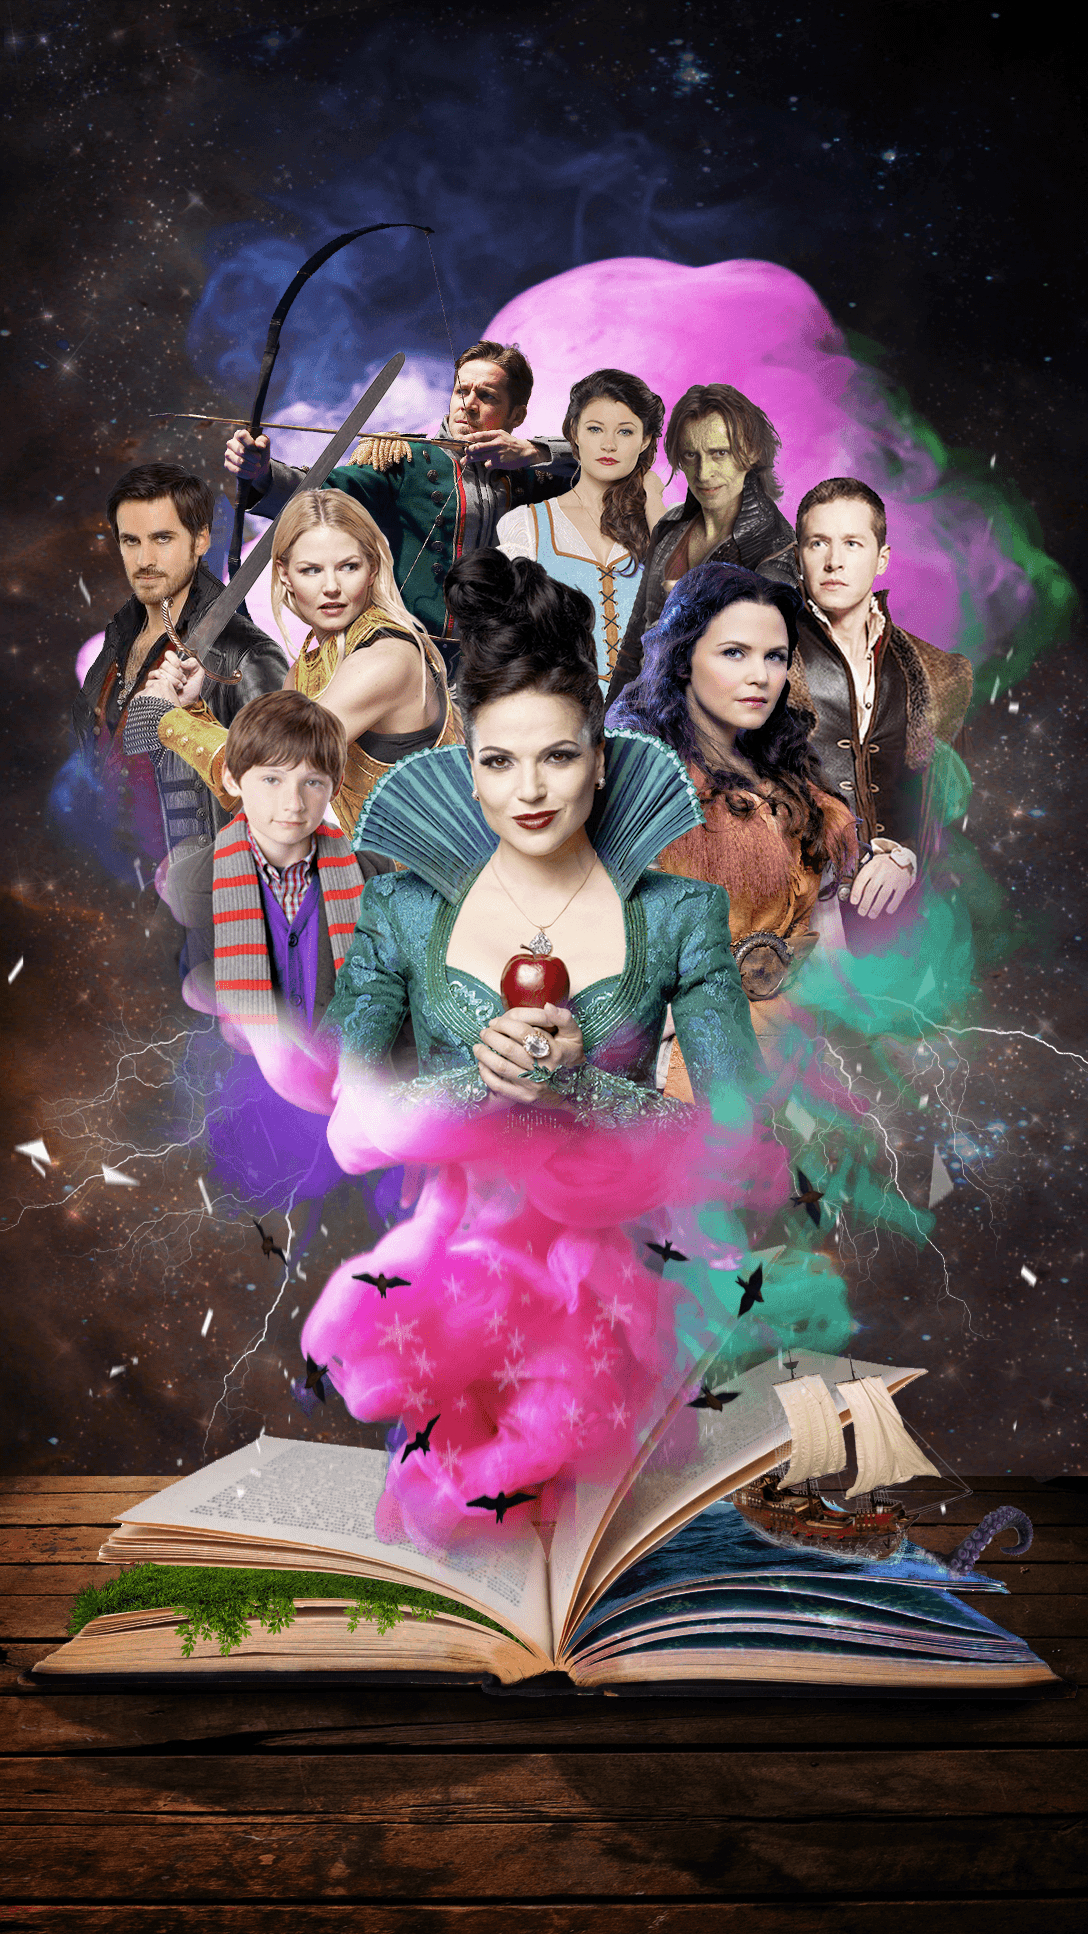 1088x1934 Once Upon A Time iPhone Wallpaper Imgur | Once upon a time funny, Once upon a time, Ouat